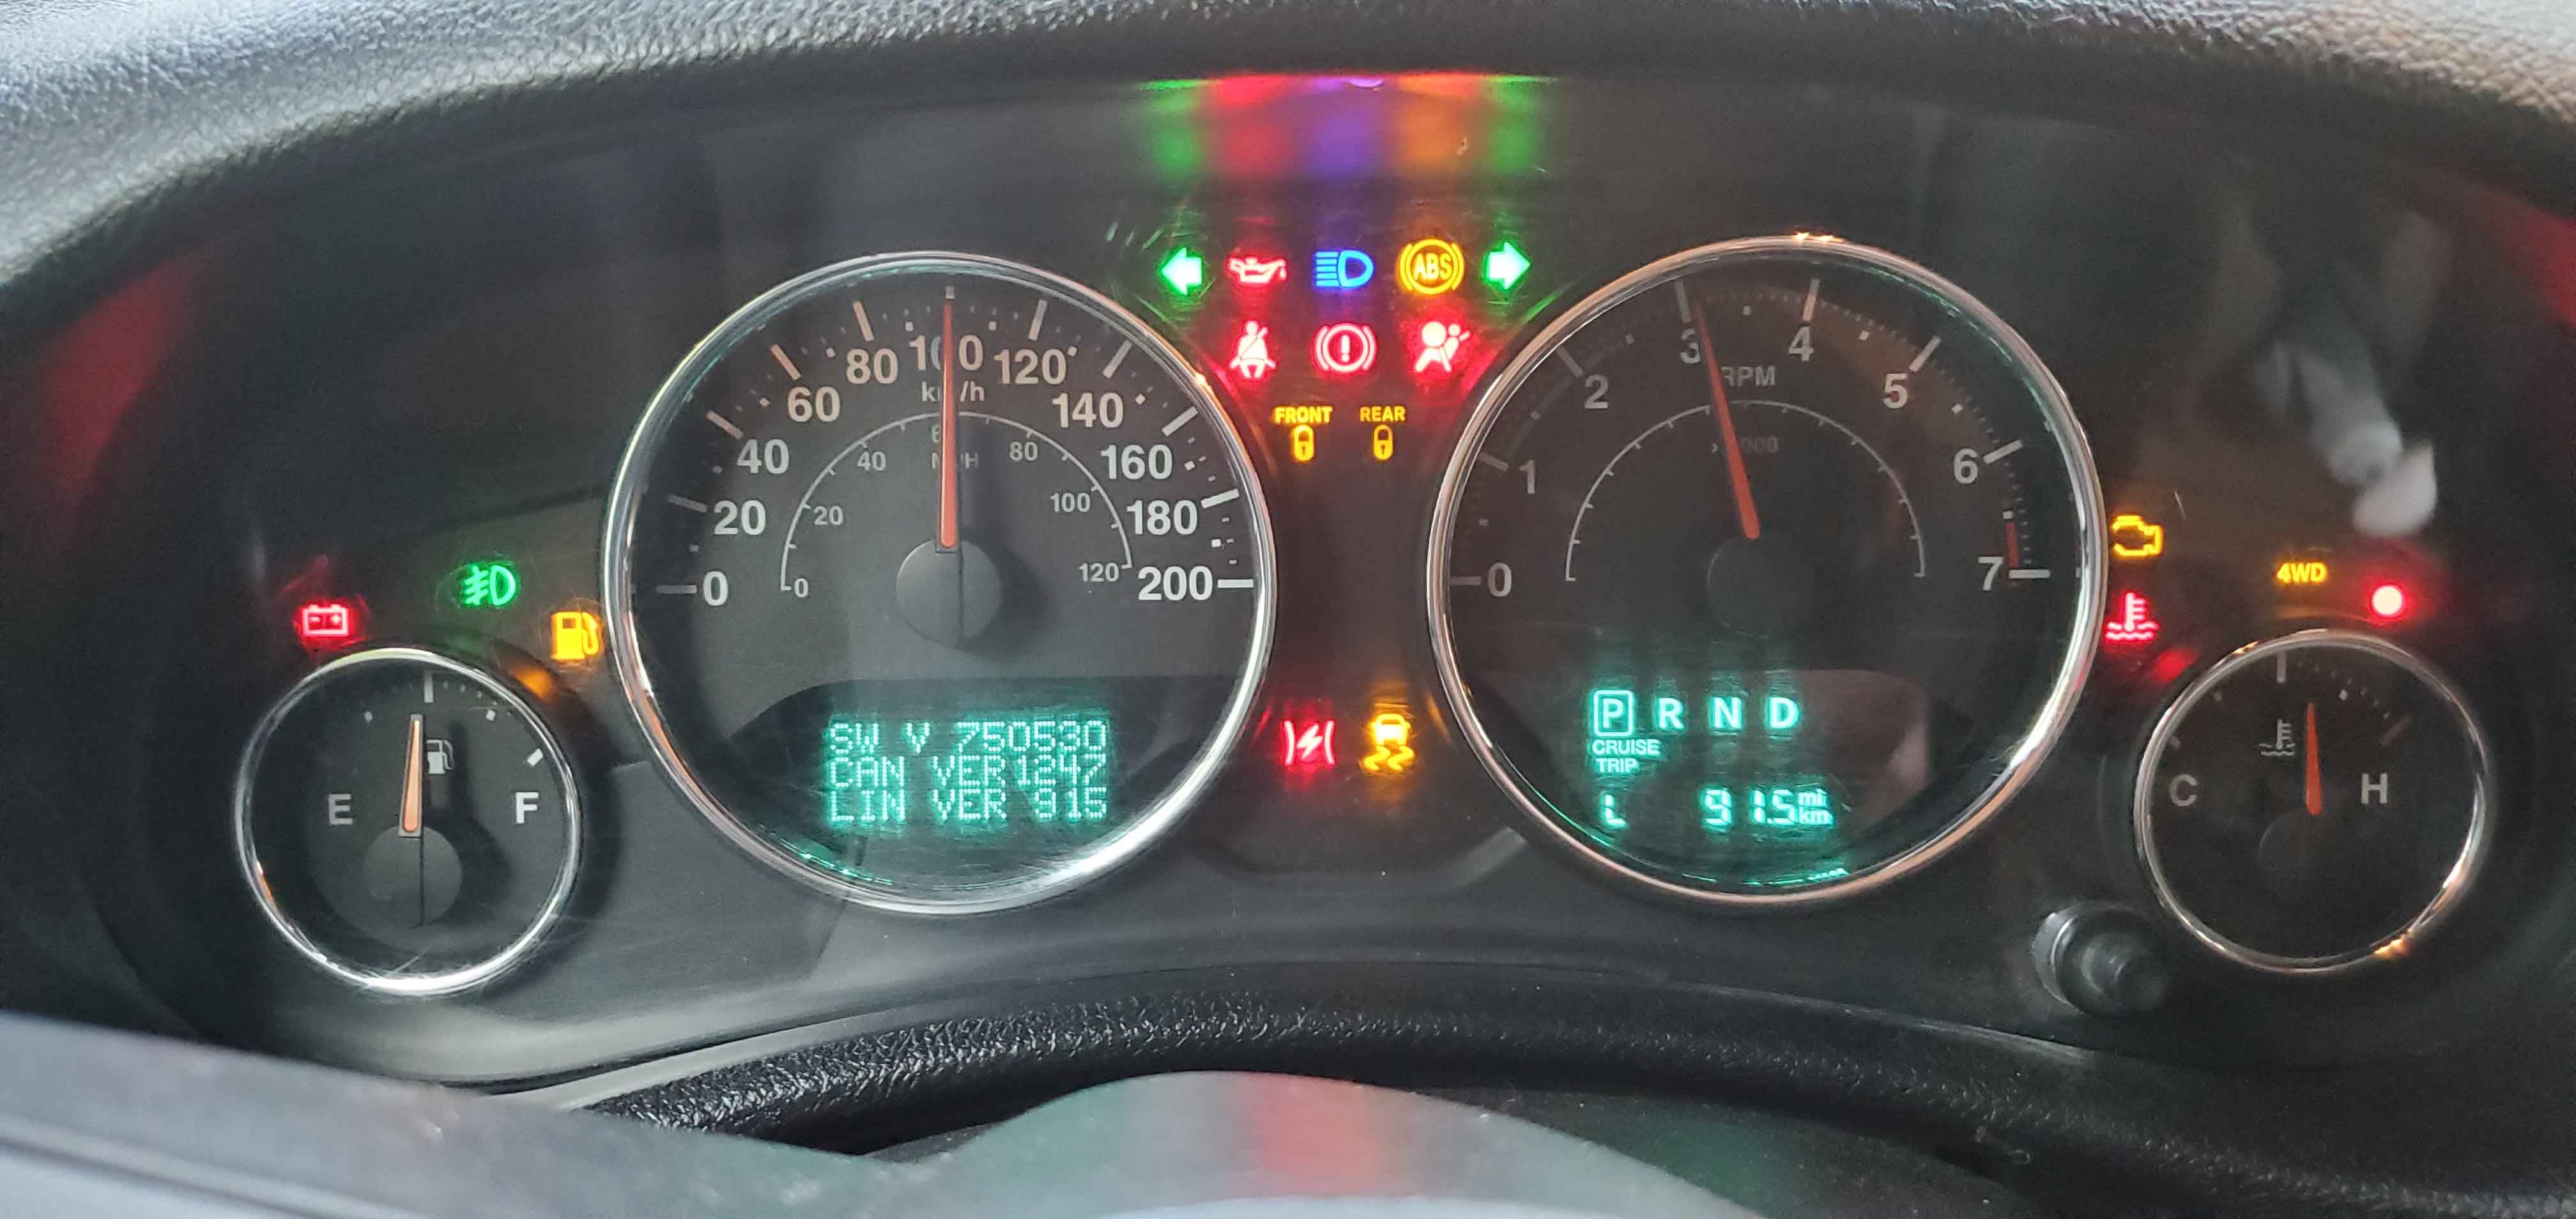 Green lights on dash left of speedometer. 2013 unlimited Rubicon | Jeep  Wrangler Forum